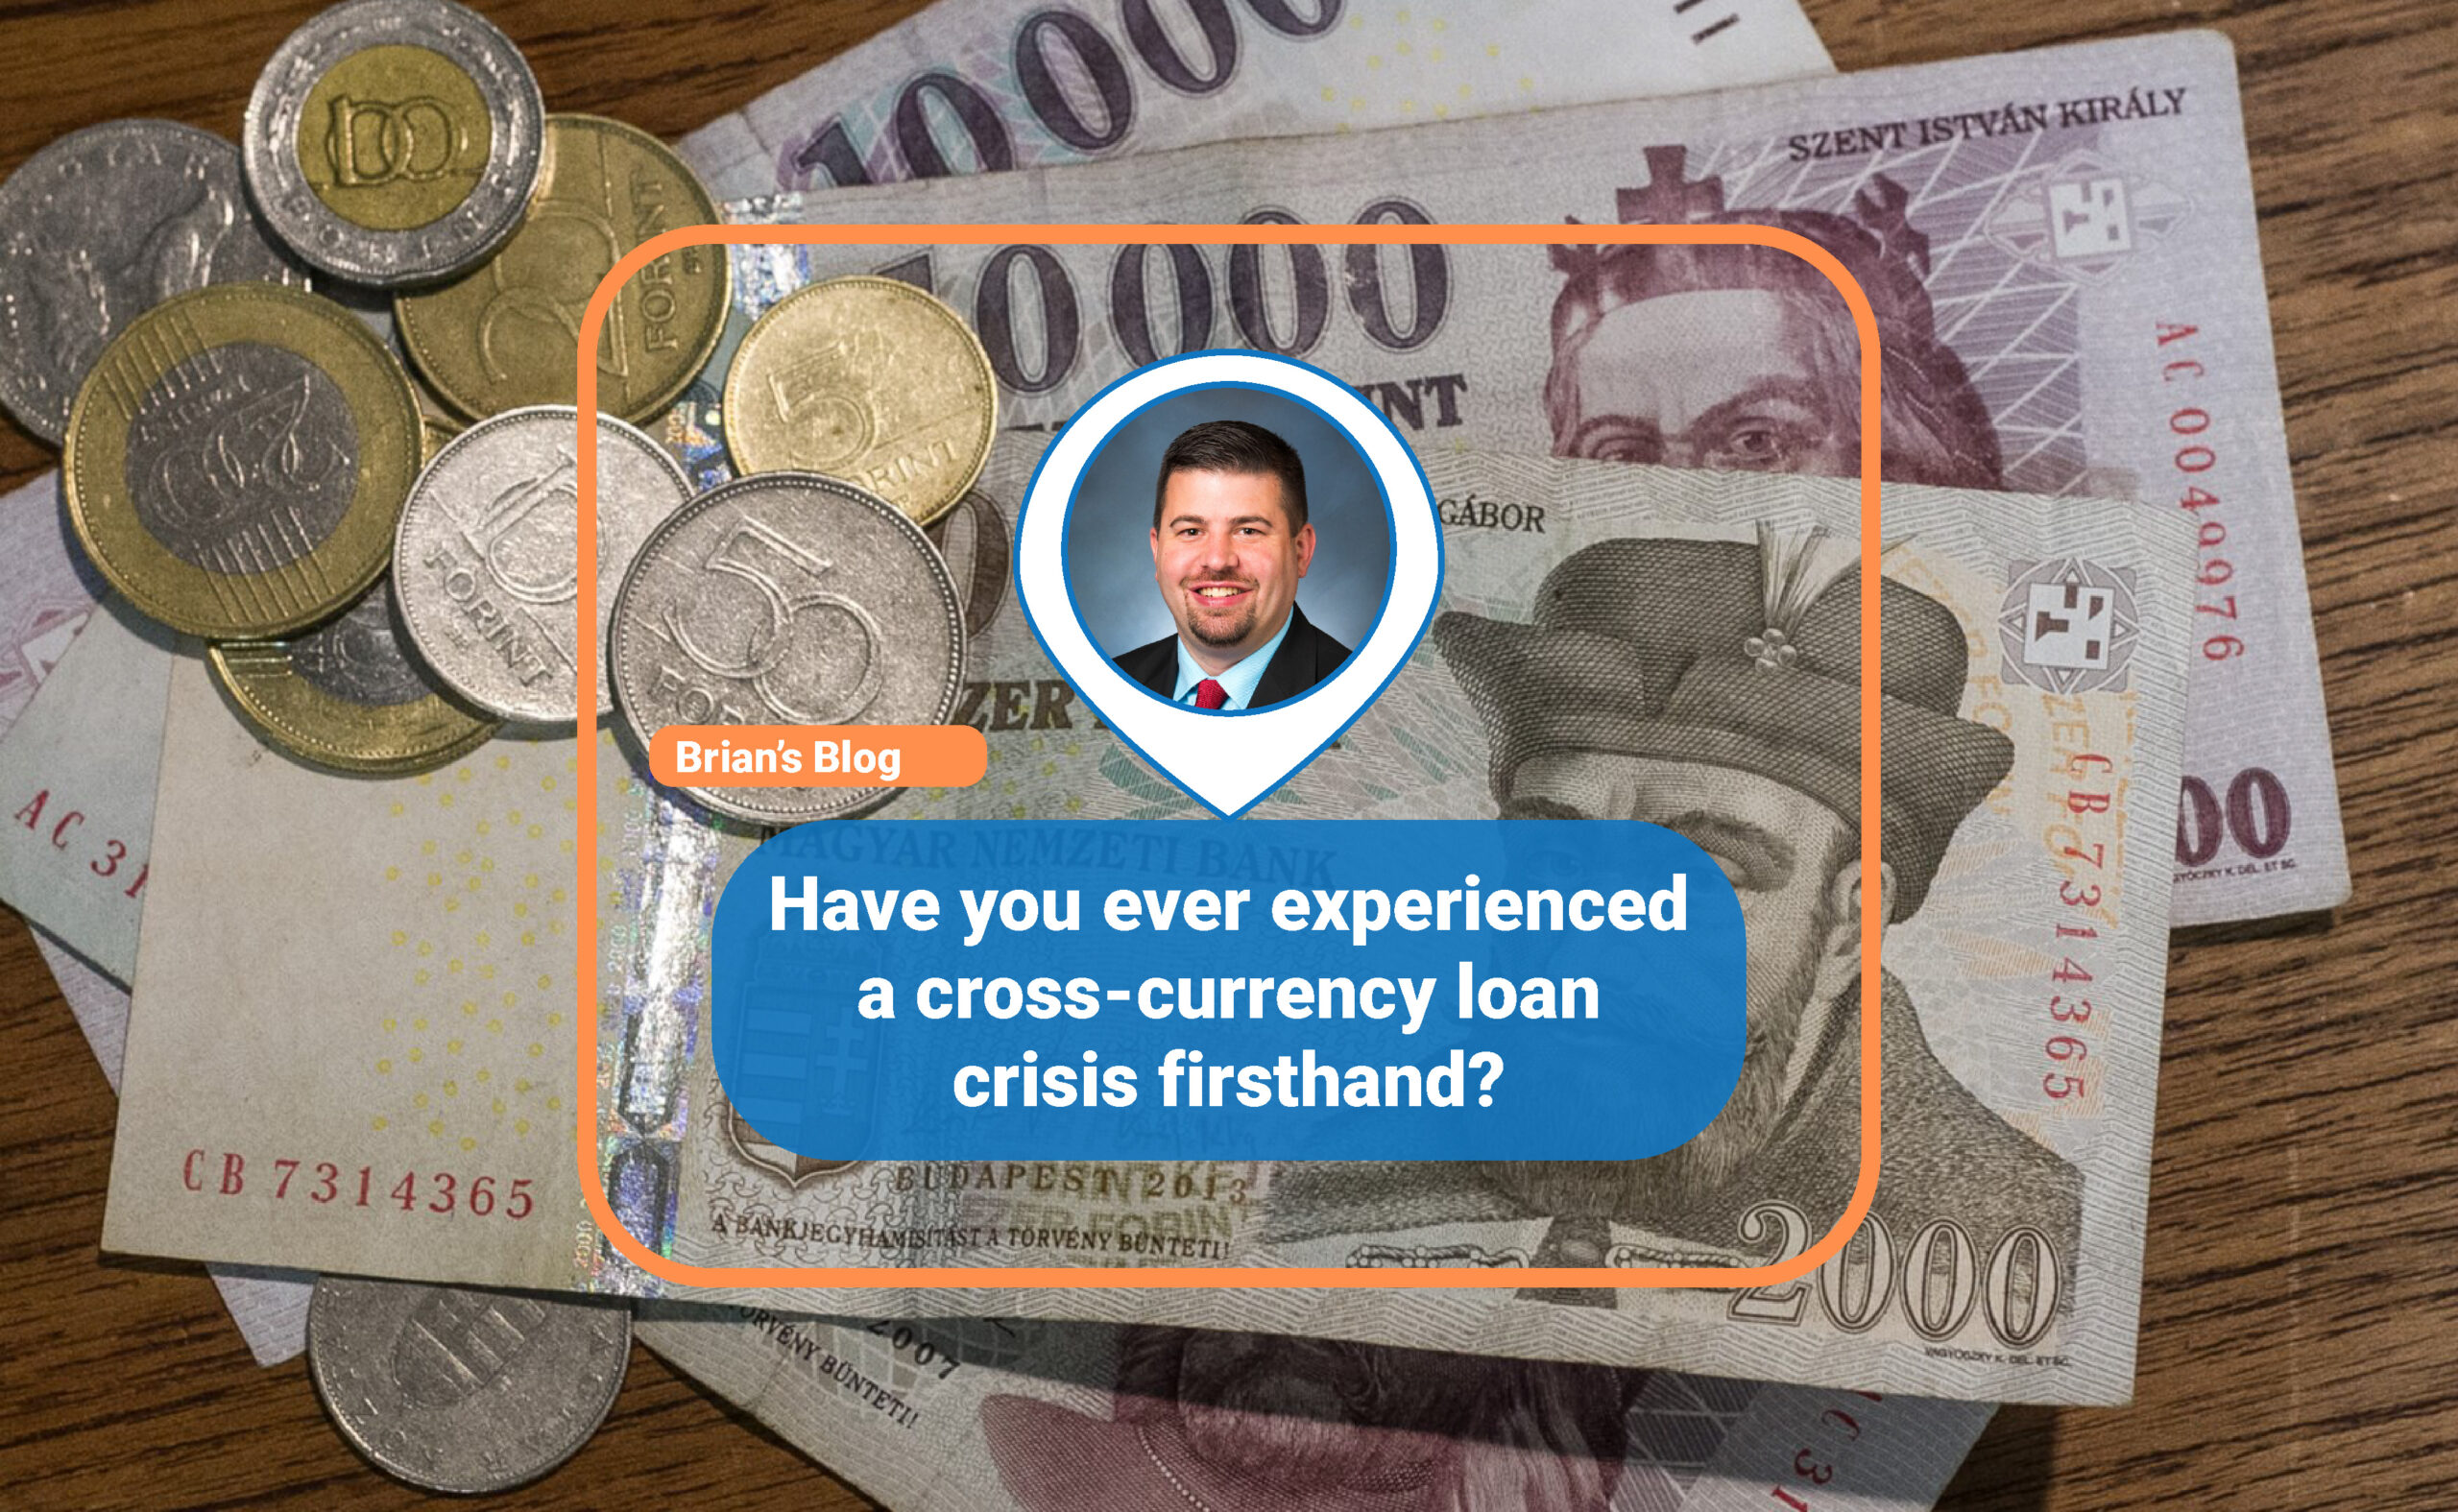 Have you ever experienced a cross-currency loan crisis firsthand?